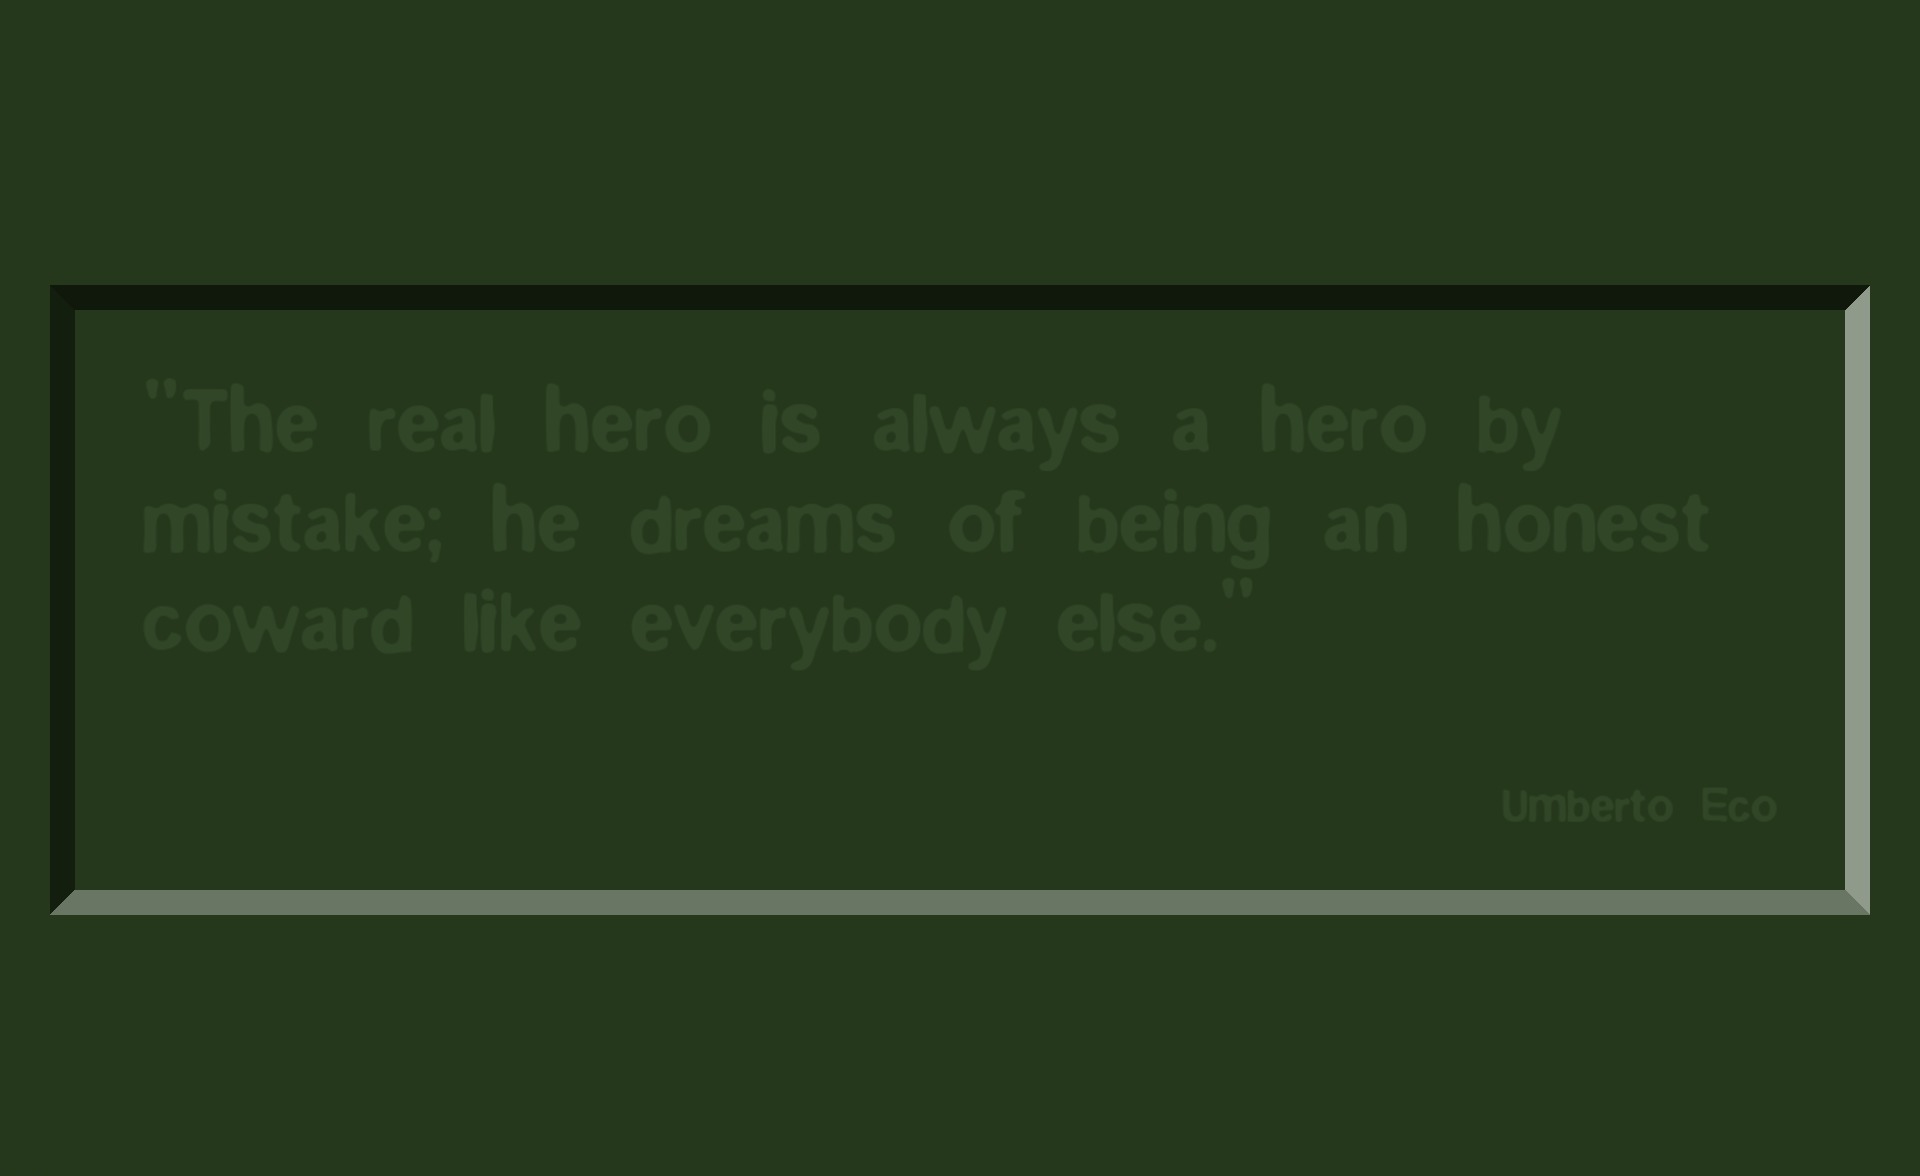 the real hero is always a hero by mistake he dream of